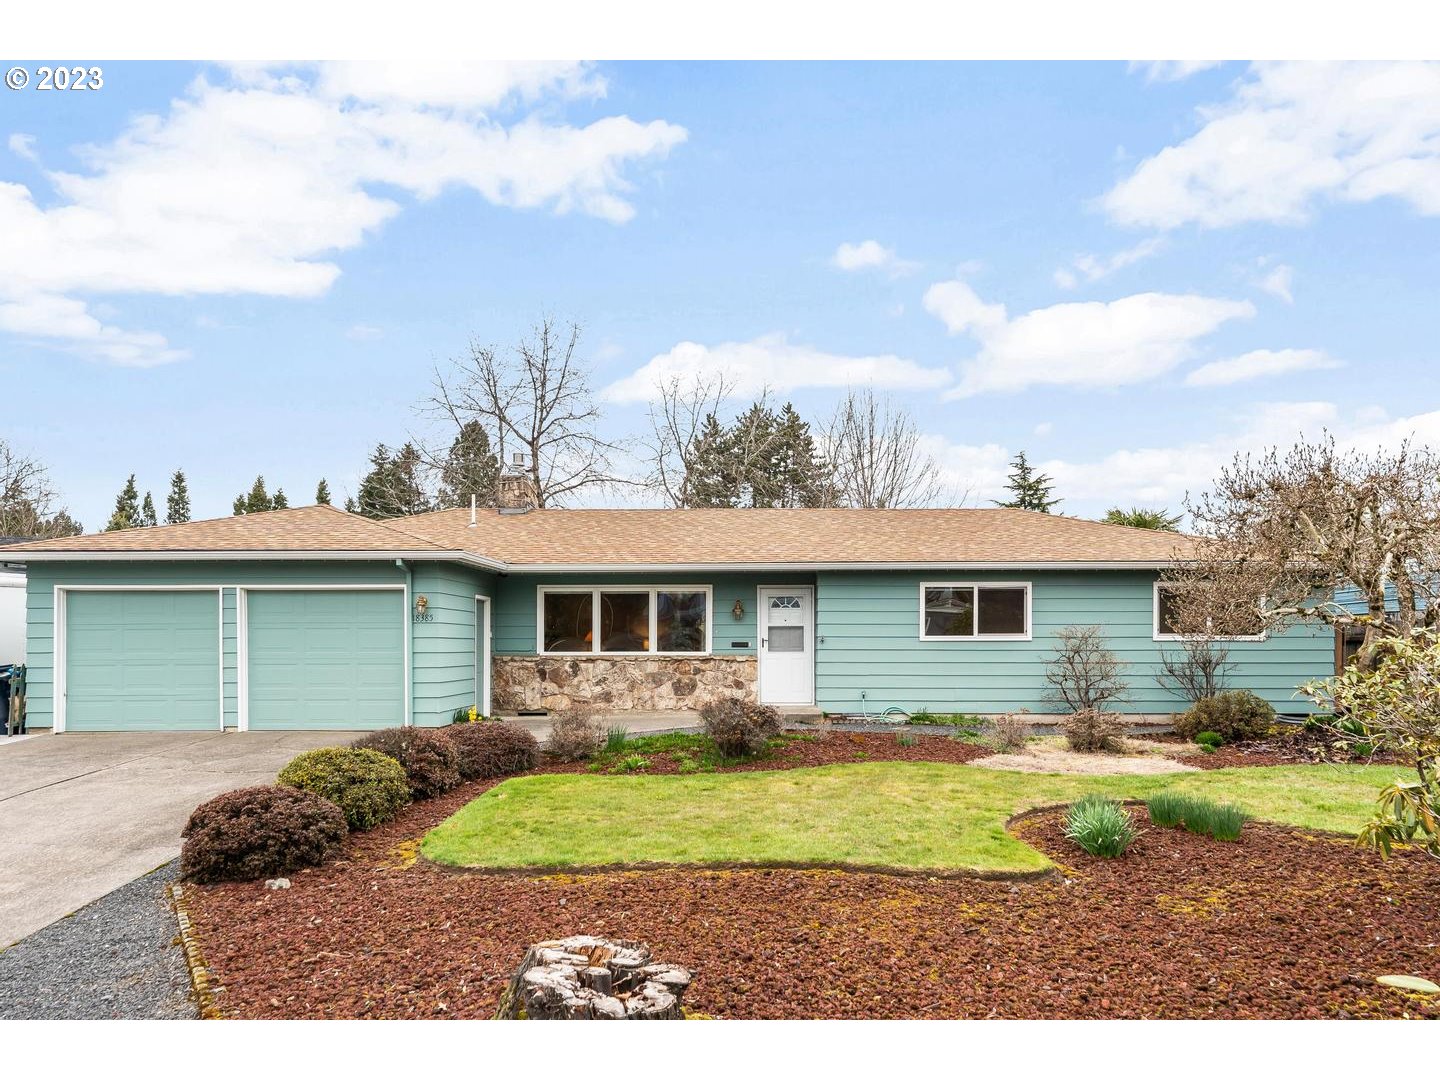 18385 SW DIVISION ST, Aloha, OR 97078